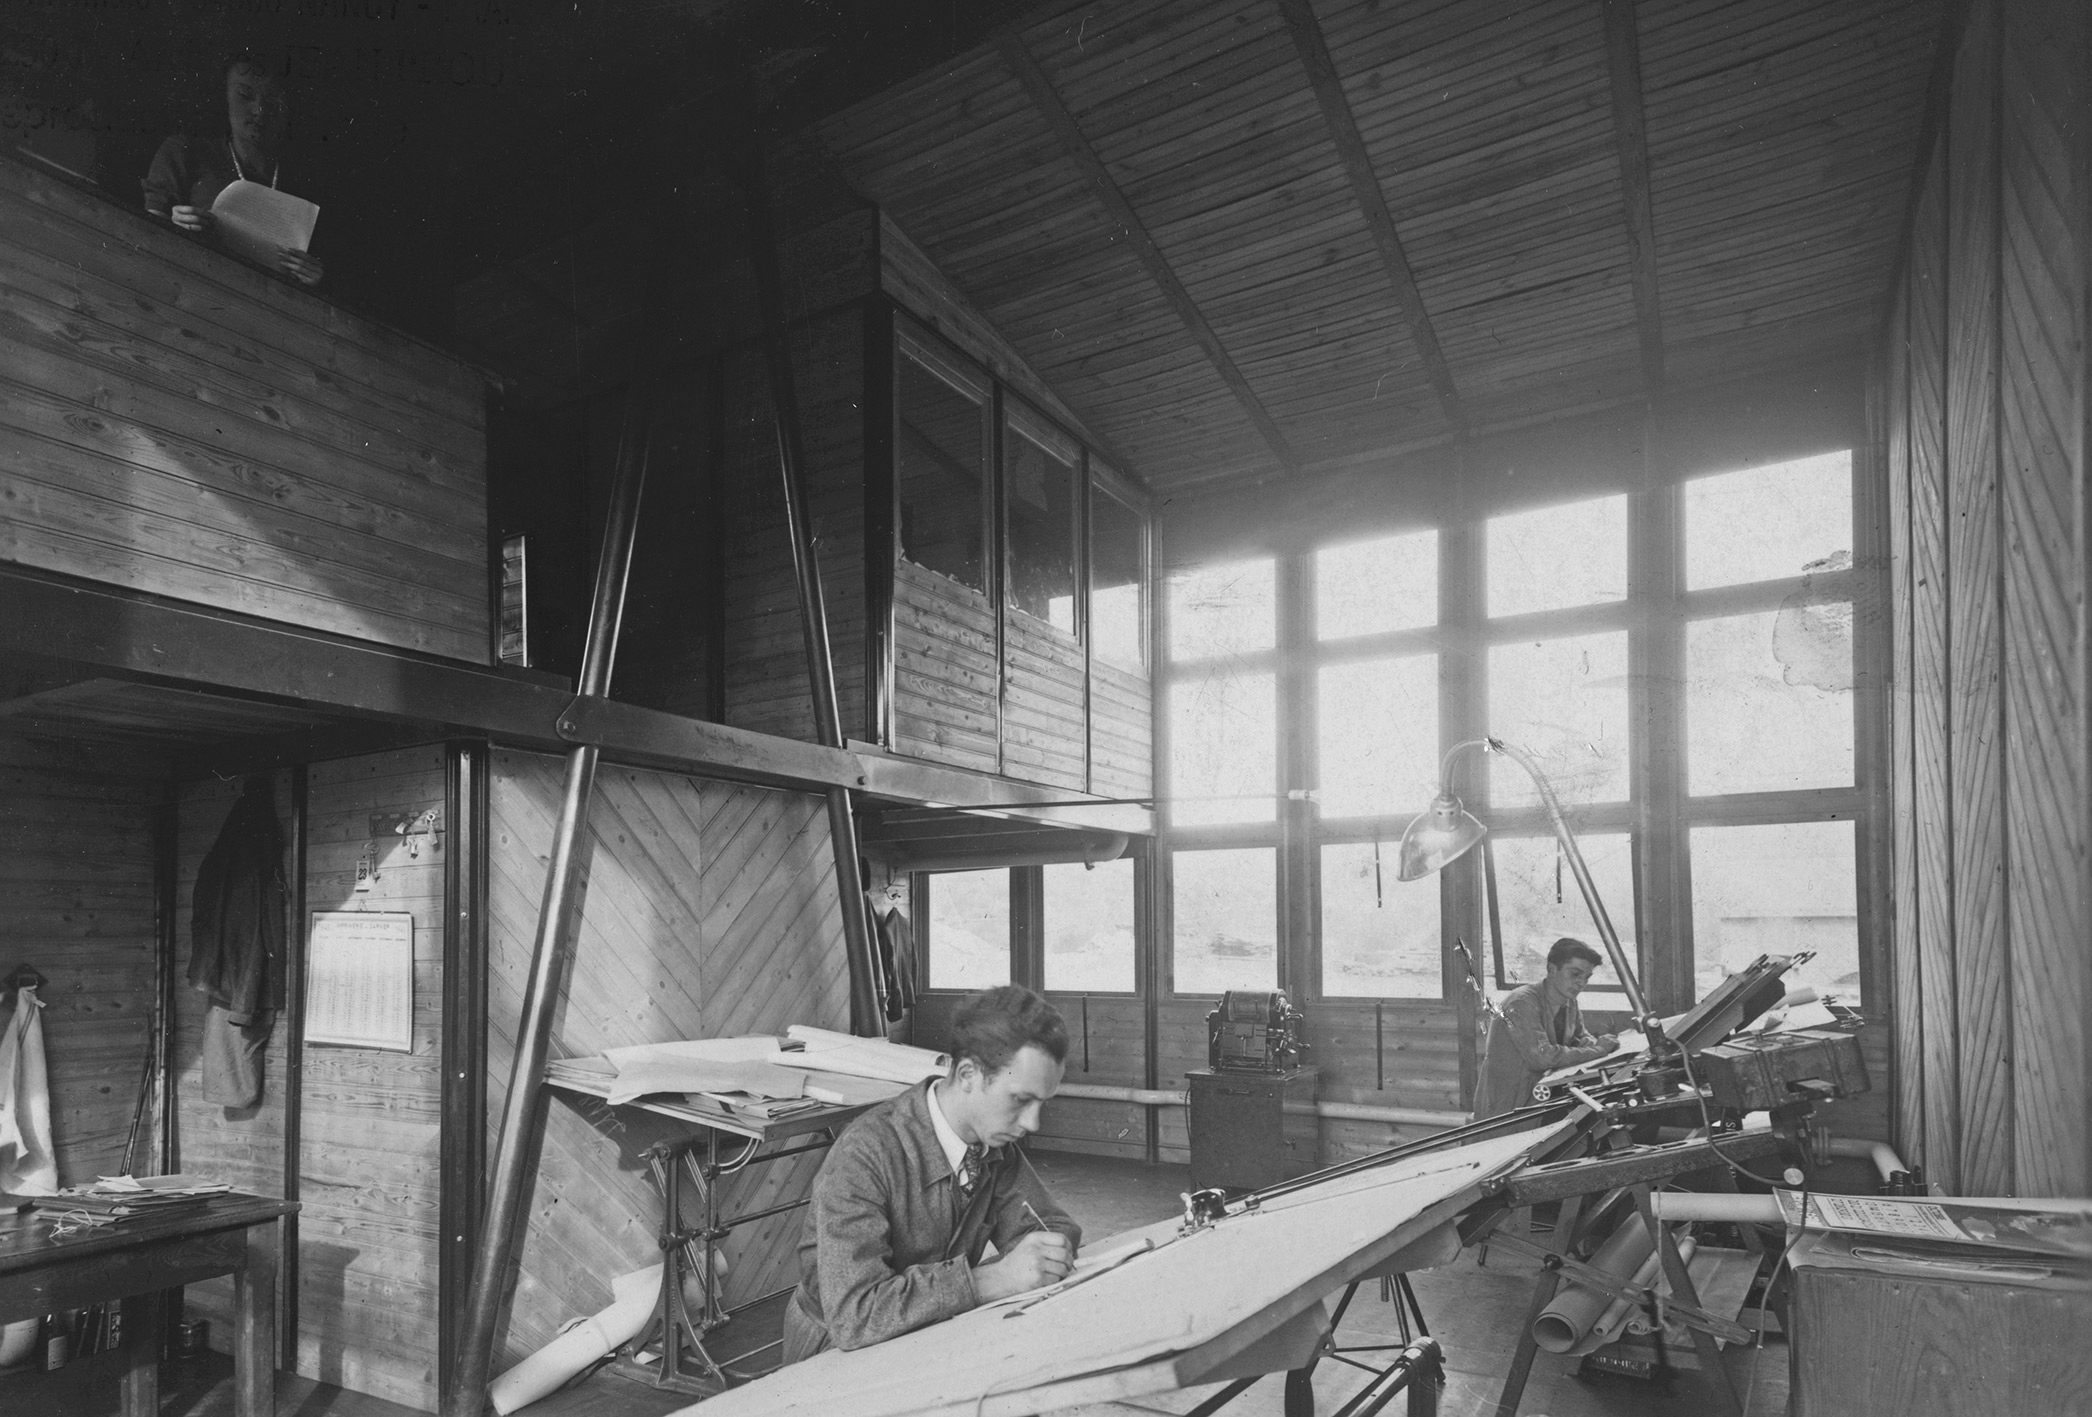 SCAL drafting pavilion. Constructive system Jean Prouvé, Pierre Jeanneret, architect. Workspace on the ground floor and management office on the mezzanine, Issoire, ca. 1940